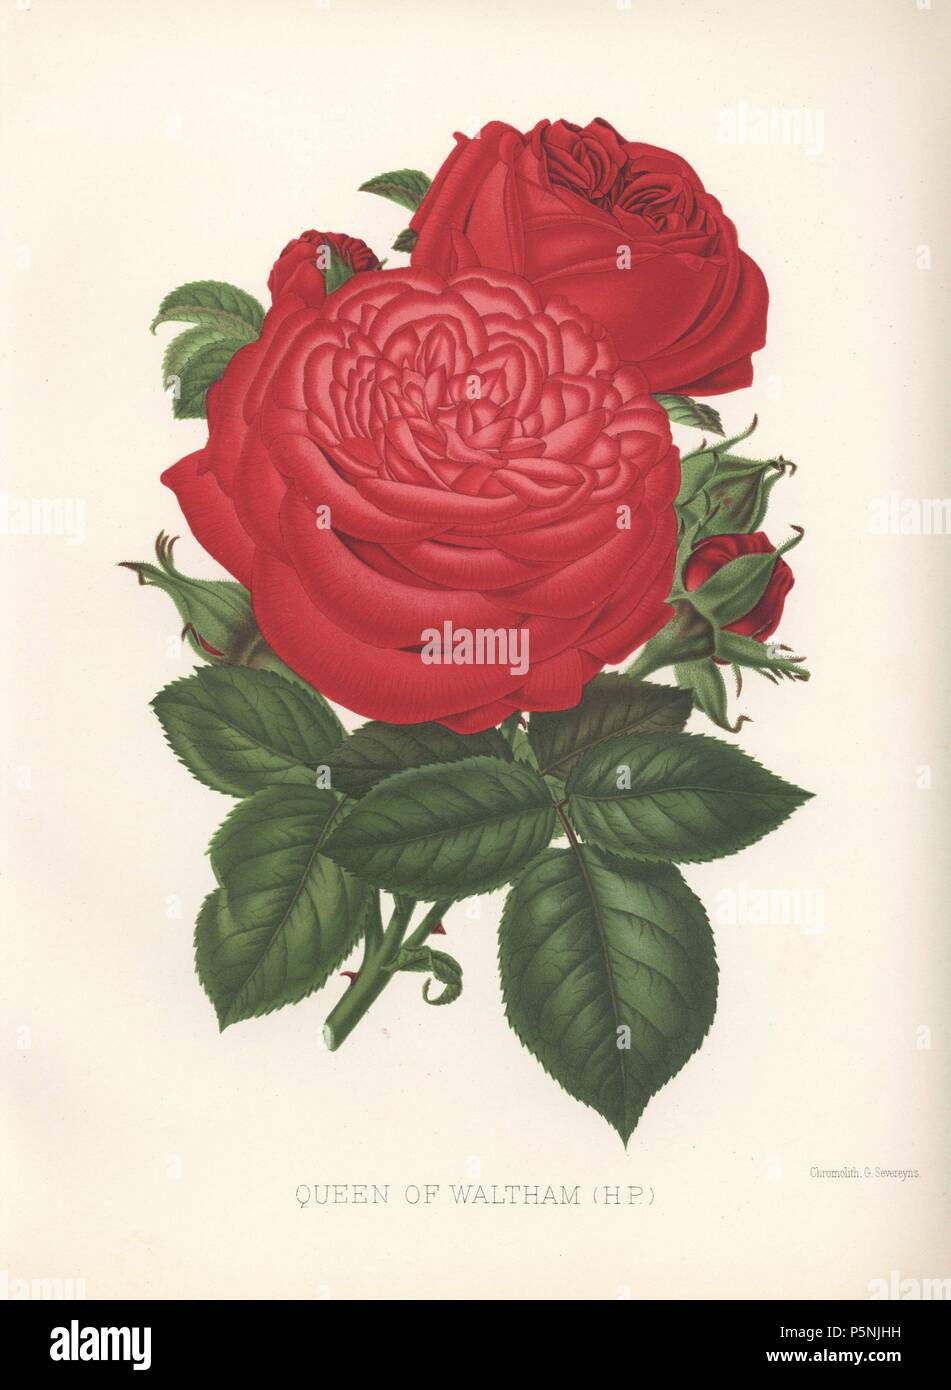 Queen of Waltham hybrid crimson rose. Chromolithograph by Georges Severeyns from an illustration by Walter H. Fitch from William Paul's 'The Rose Garden in two divisions,' London, 1888. First issued in 1848 with 15 coloured plates, 'The Rose Garden' soon became a standard work on roses and ran to 10 editions, the last in 1903. The illustrations for the 9th edition were by Walter Fitch, the famous artist who illustrated Curtis' 'Botanical Magazine' for many years. Stock Photo